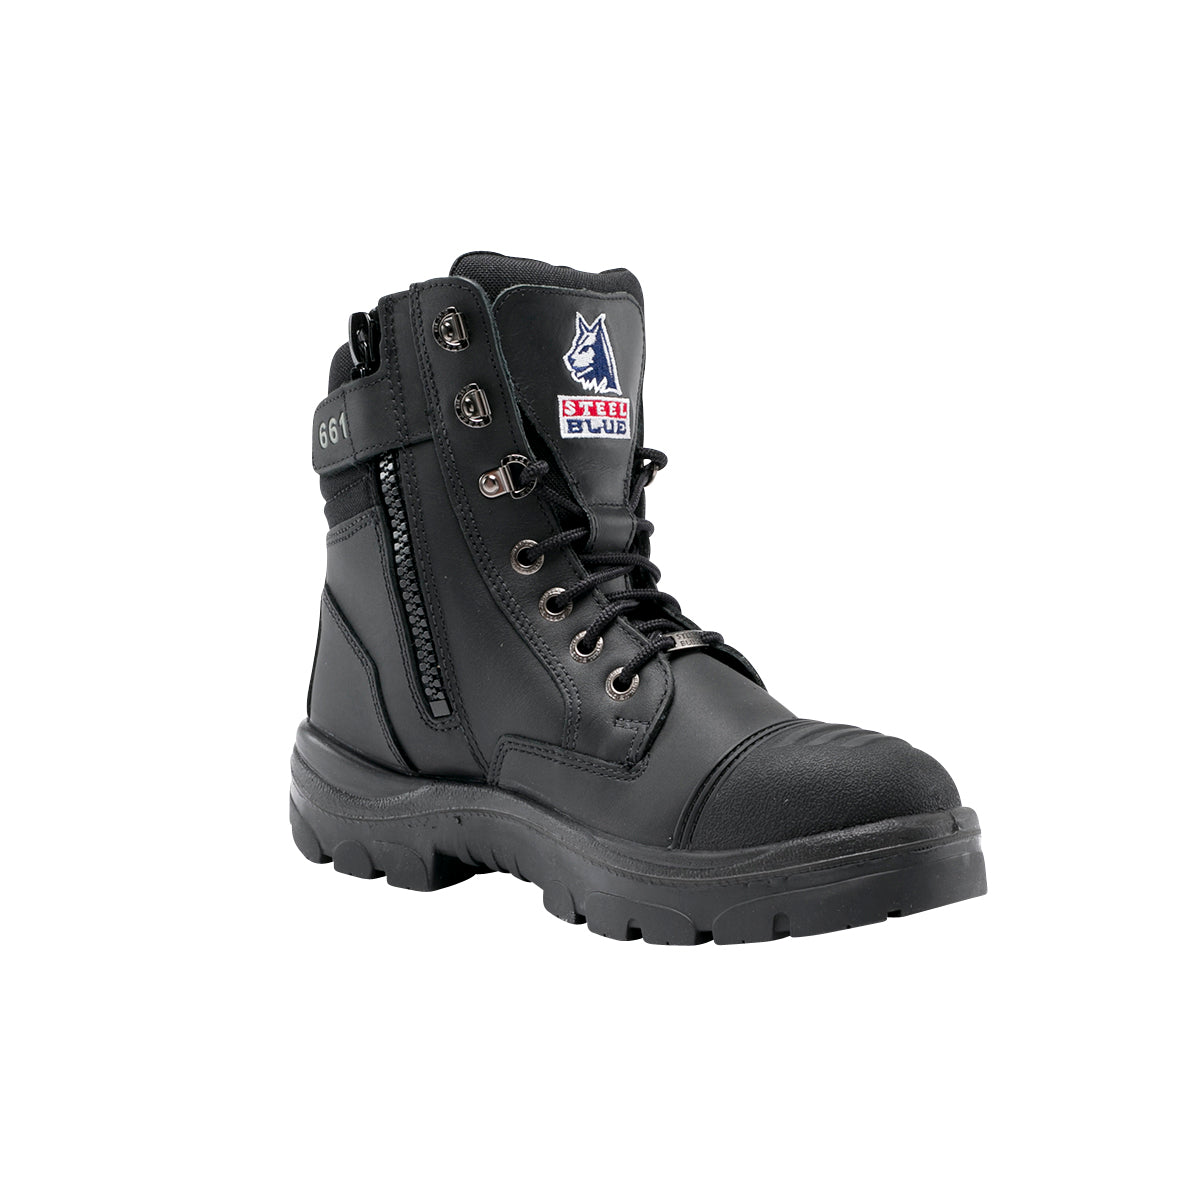 Steel Blue 312661 - Southern Cross Zip Sided Boot with Scuff Cap